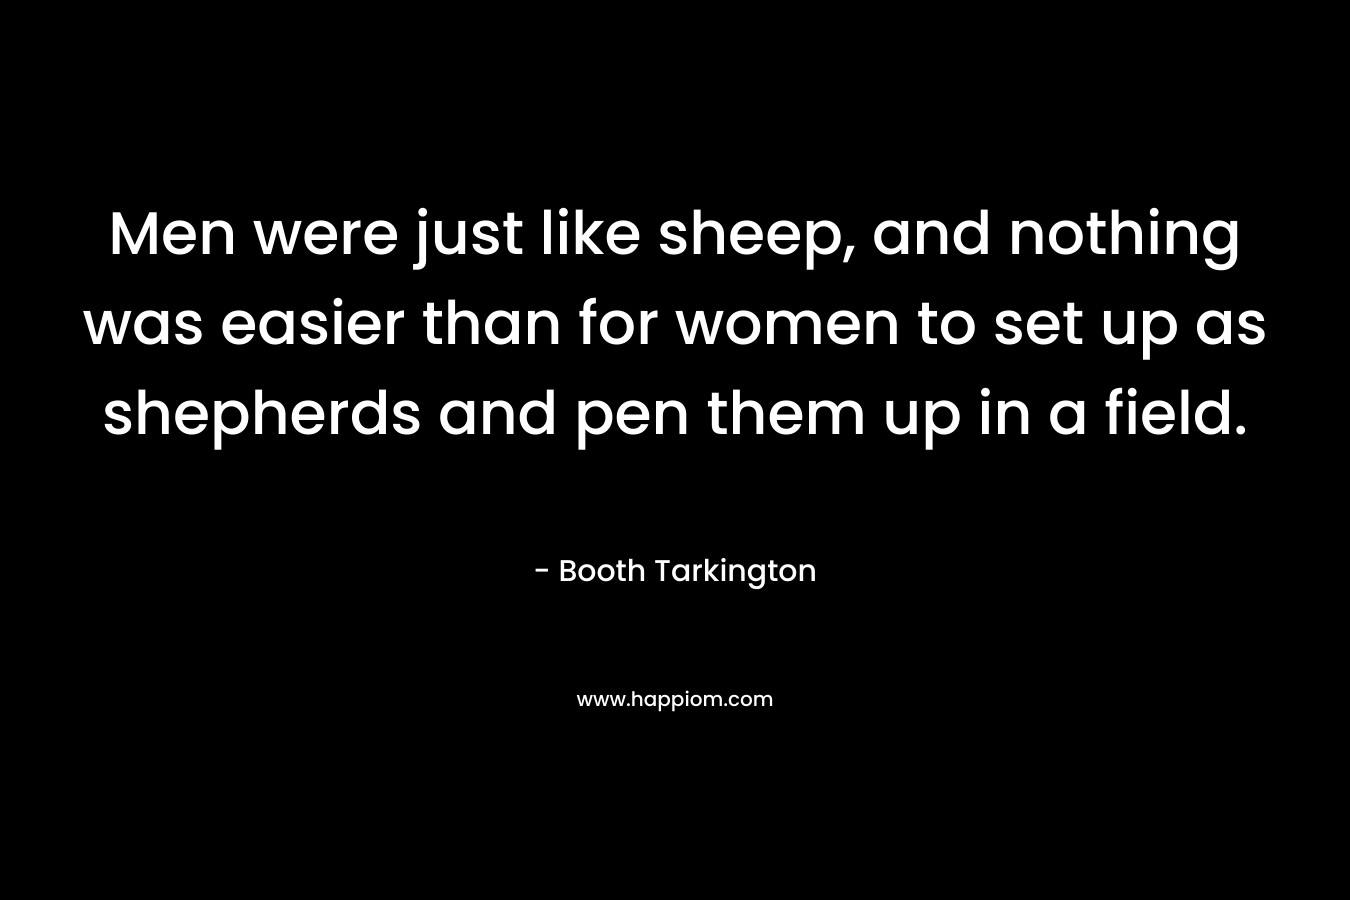 Men were just like sheep, and nothing was easier than for women to set up as shepherds and pen them up in a field.